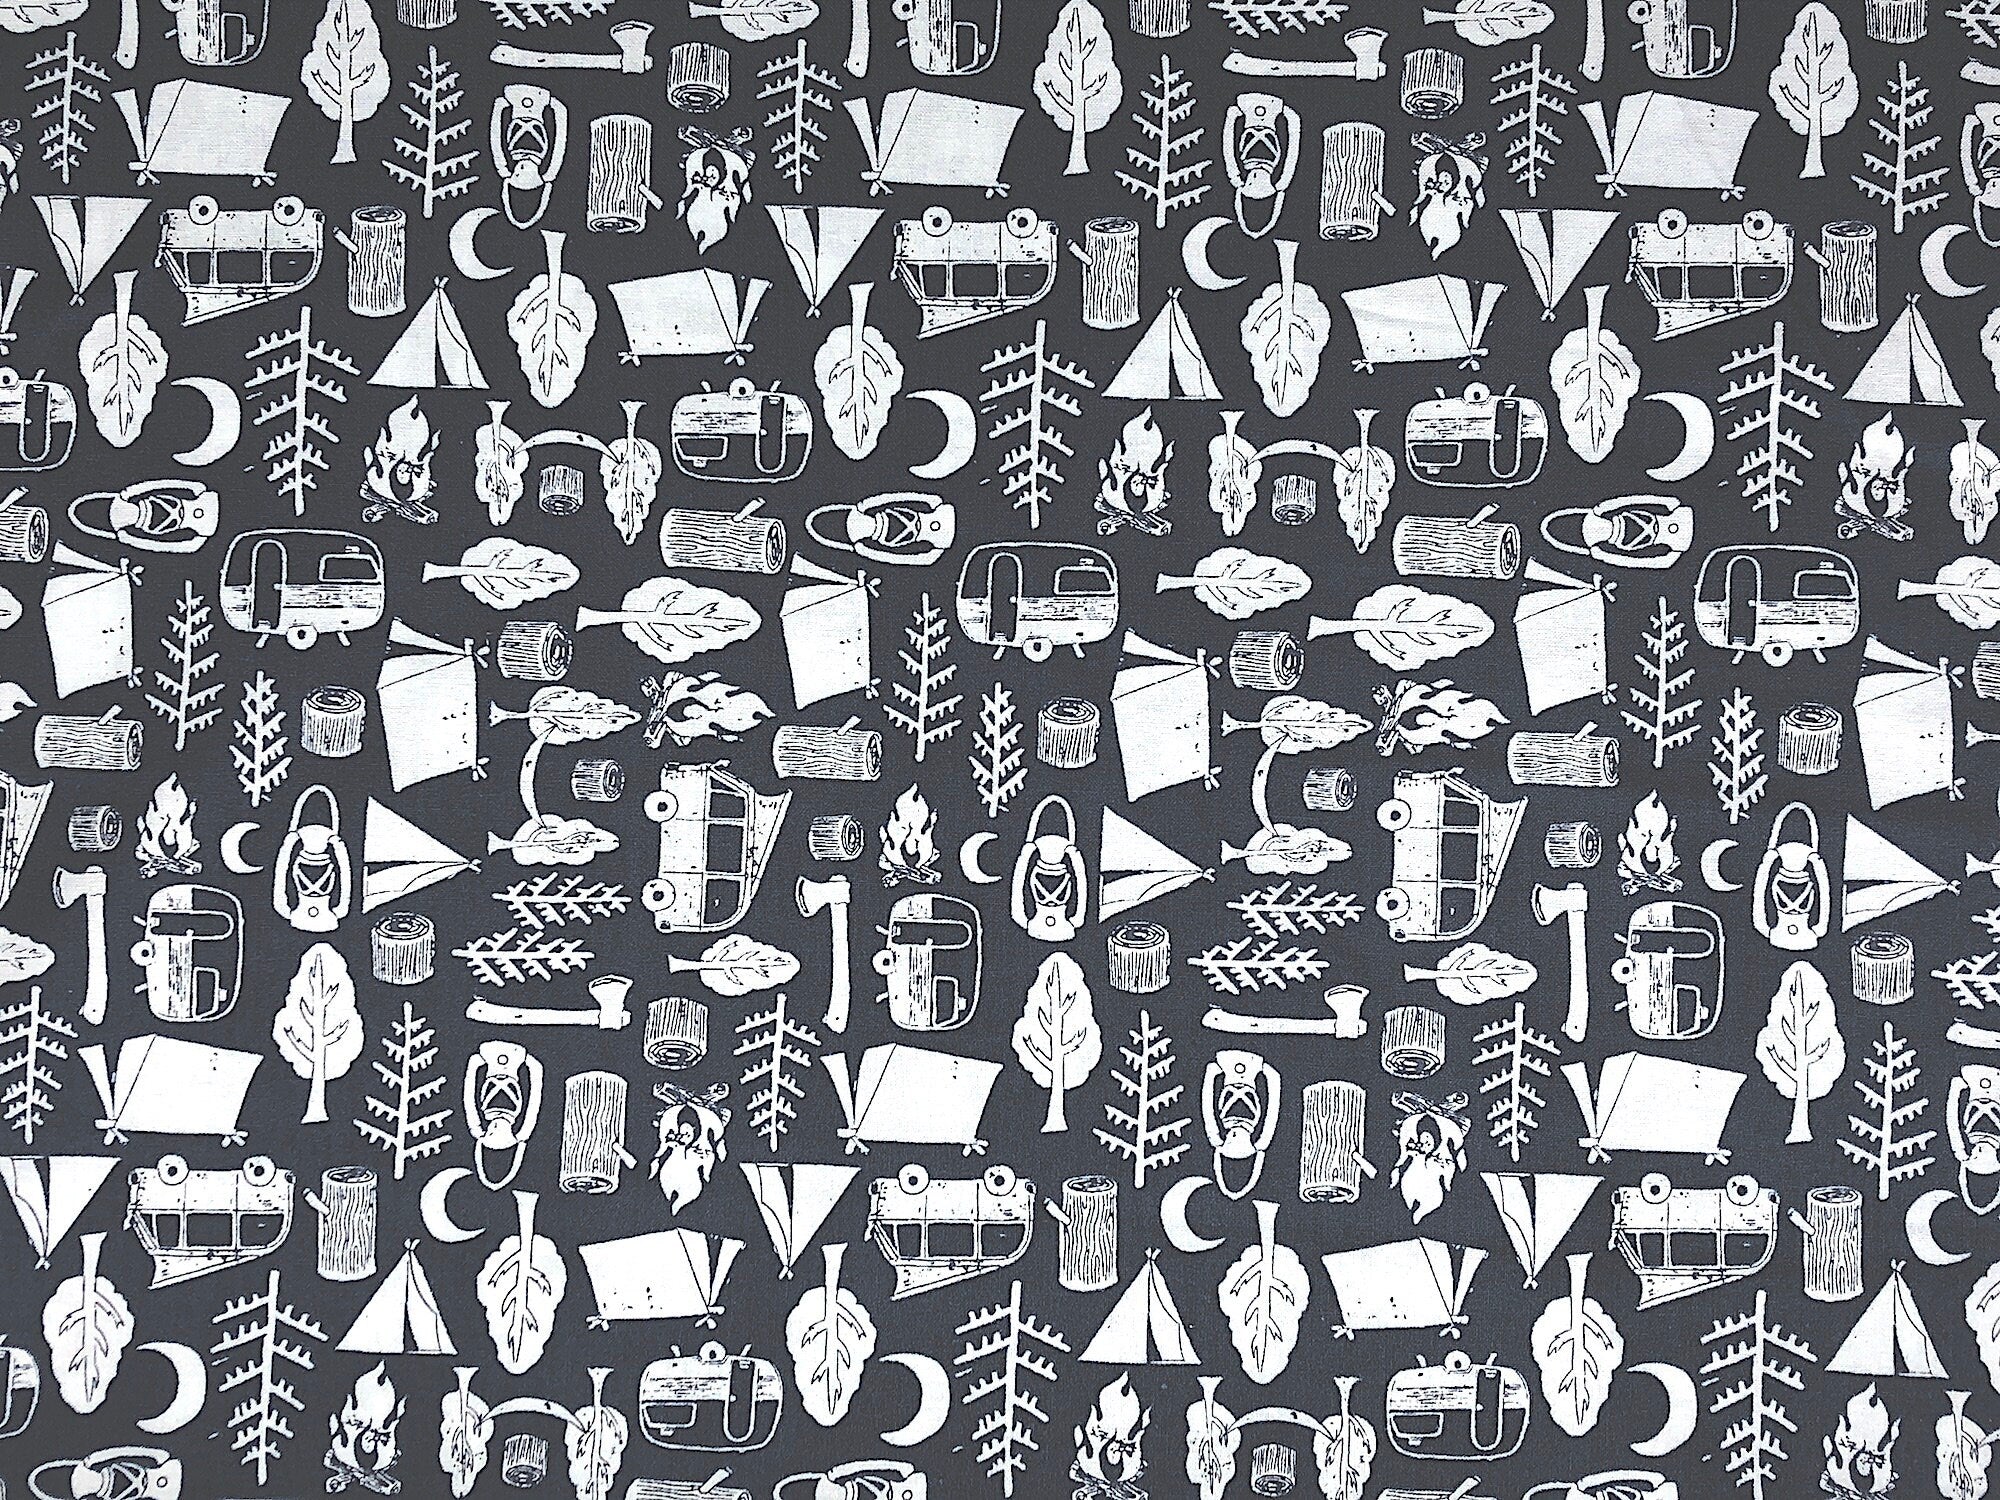 This fabric is covered with tents, trees, lanterns, travel trailers and more. This Midnight Camping fabric has a blue background.